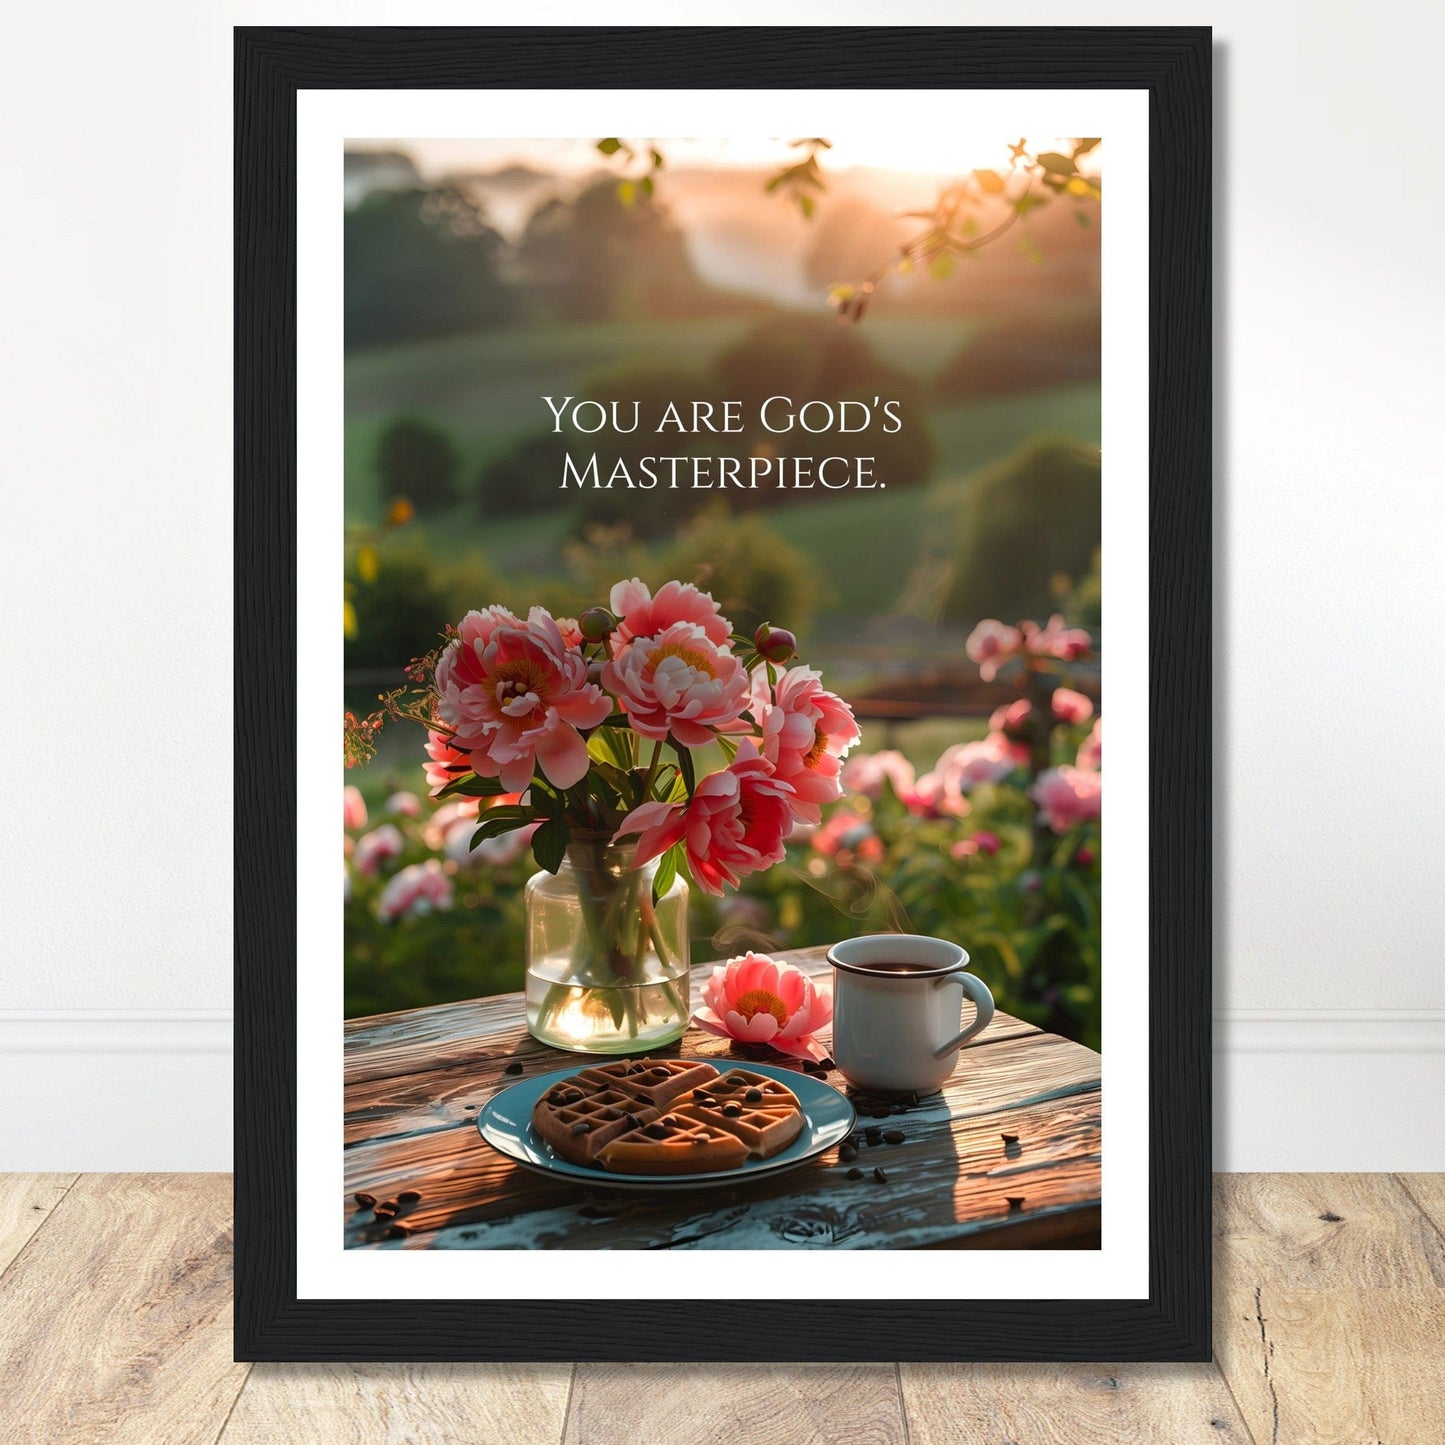 Coffee With My Father Print Material A4 21x29.7 cm / 8x12″ / Premium Matte Paper Wooden Framed Poster / Black frame You Are God's Masterpiece - Custom Art